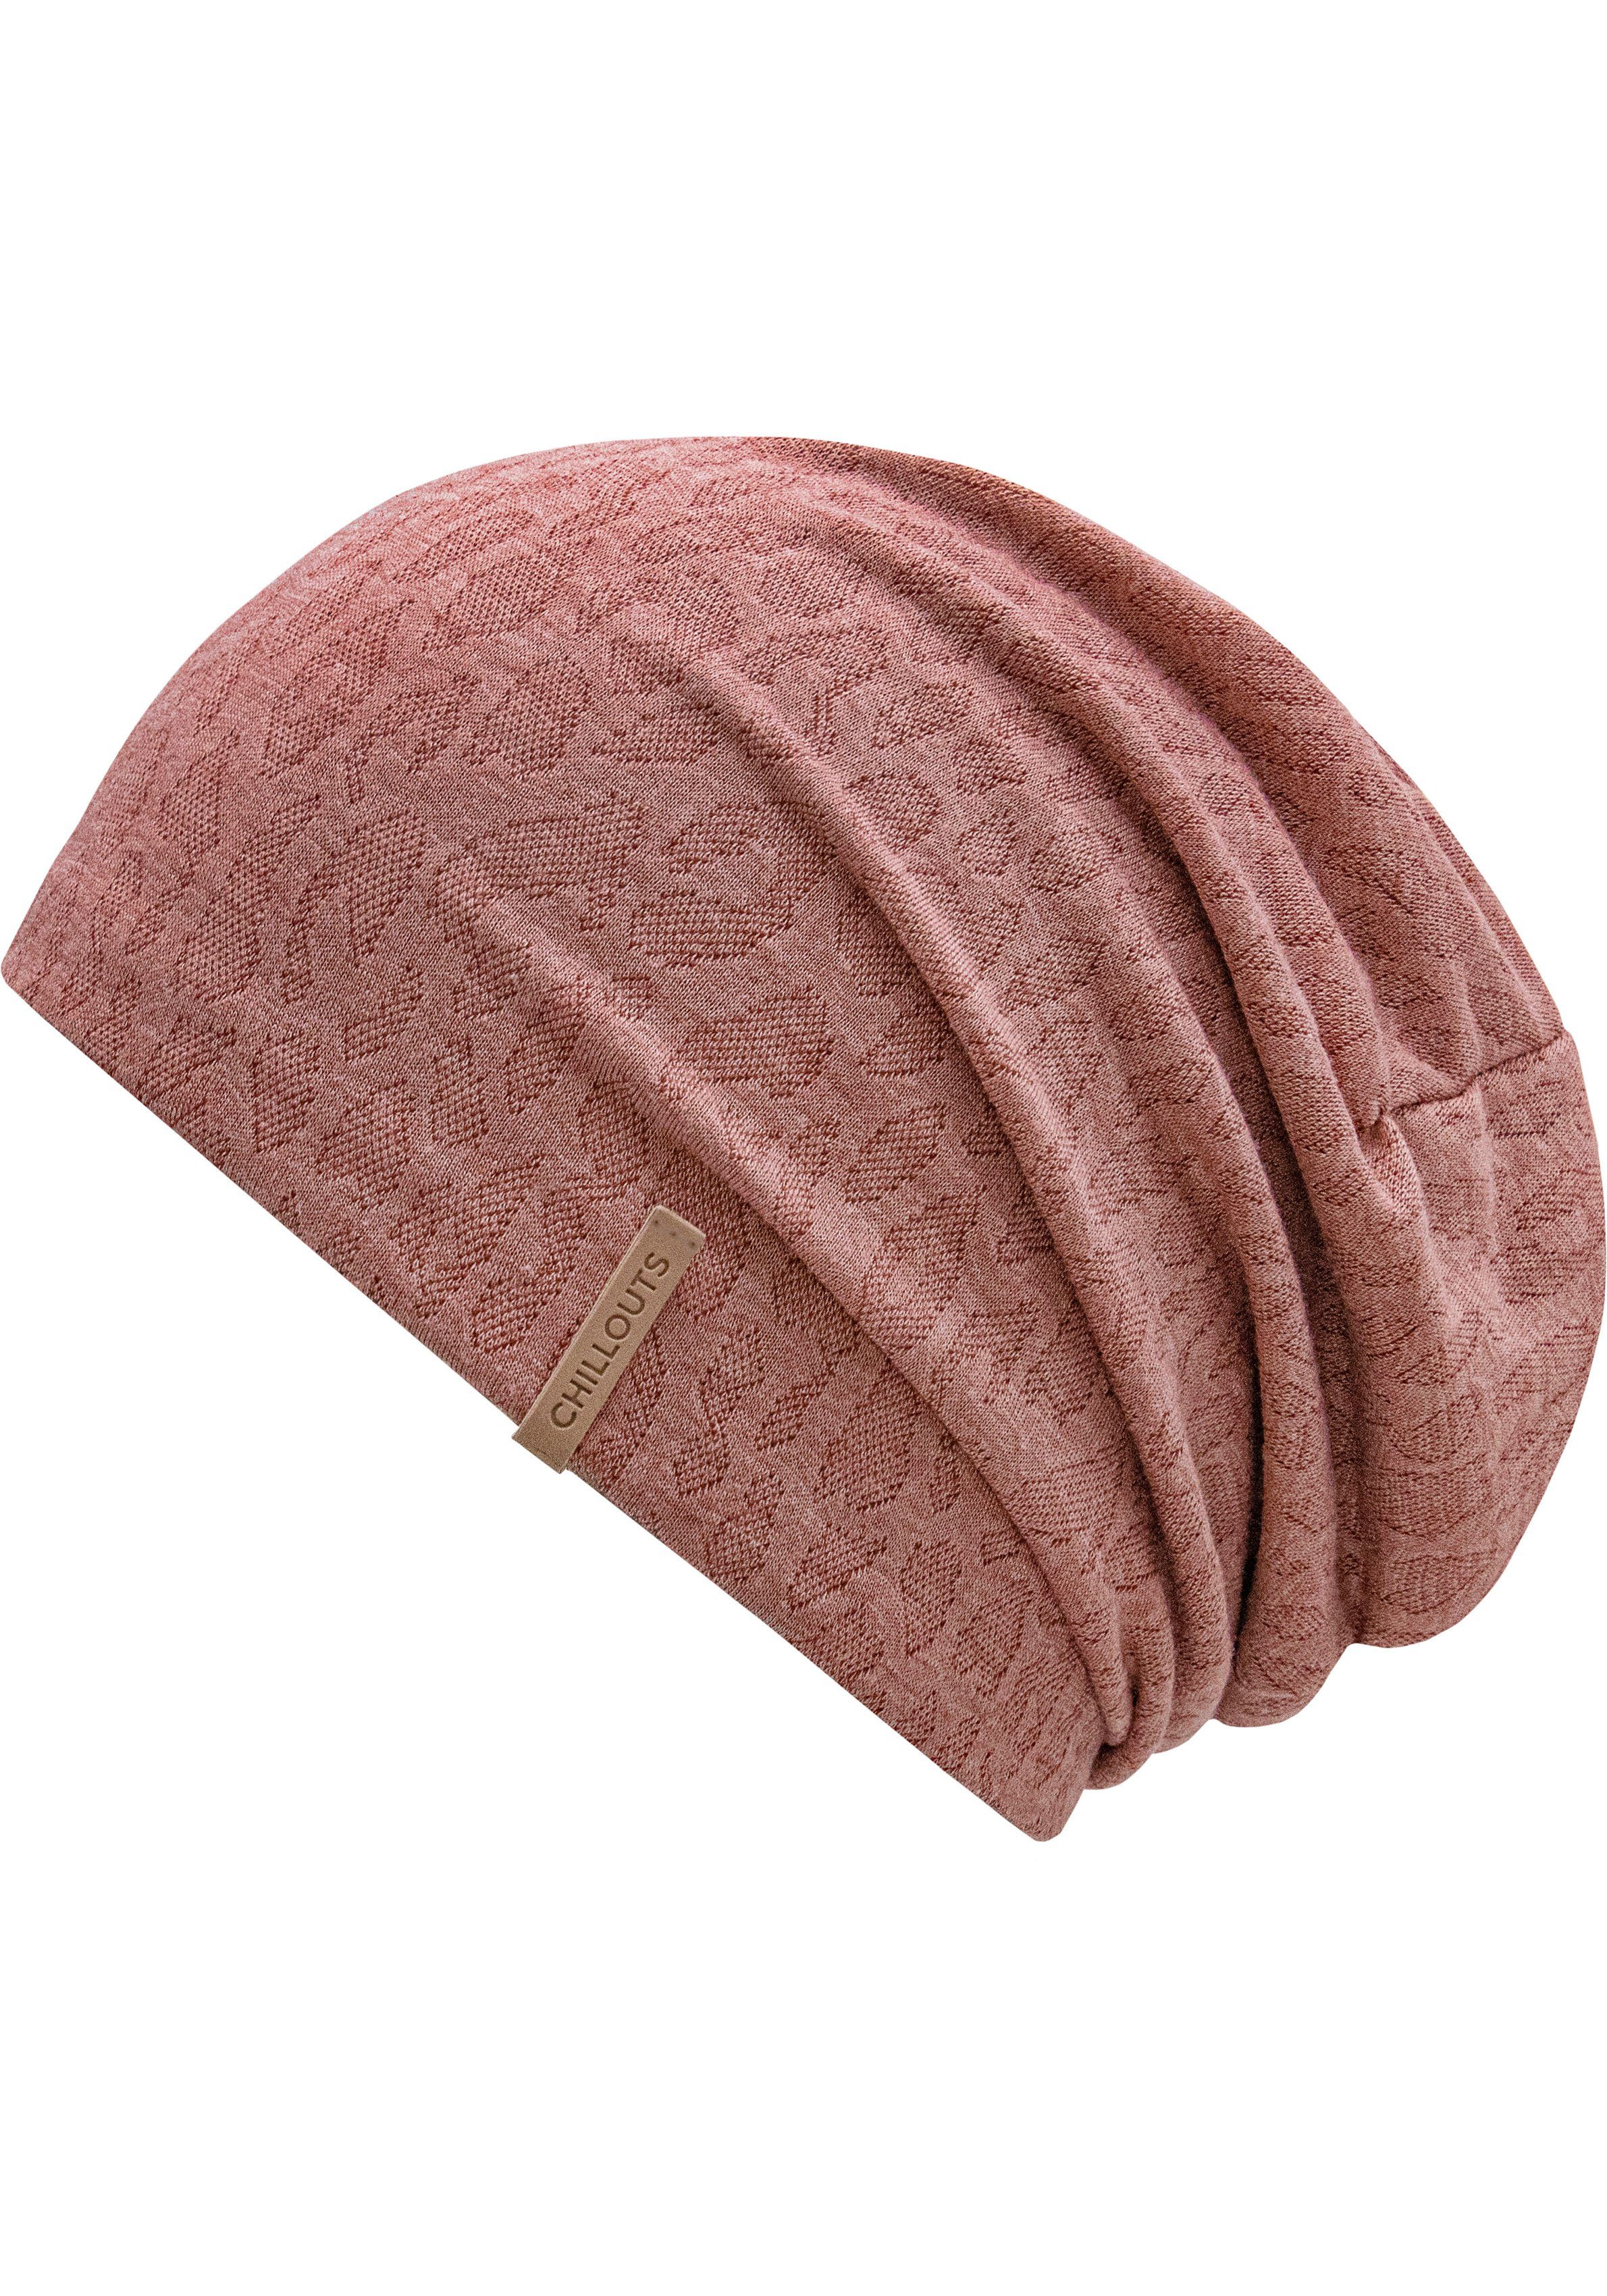 Hat Rochester terracotta chillouts Beanie